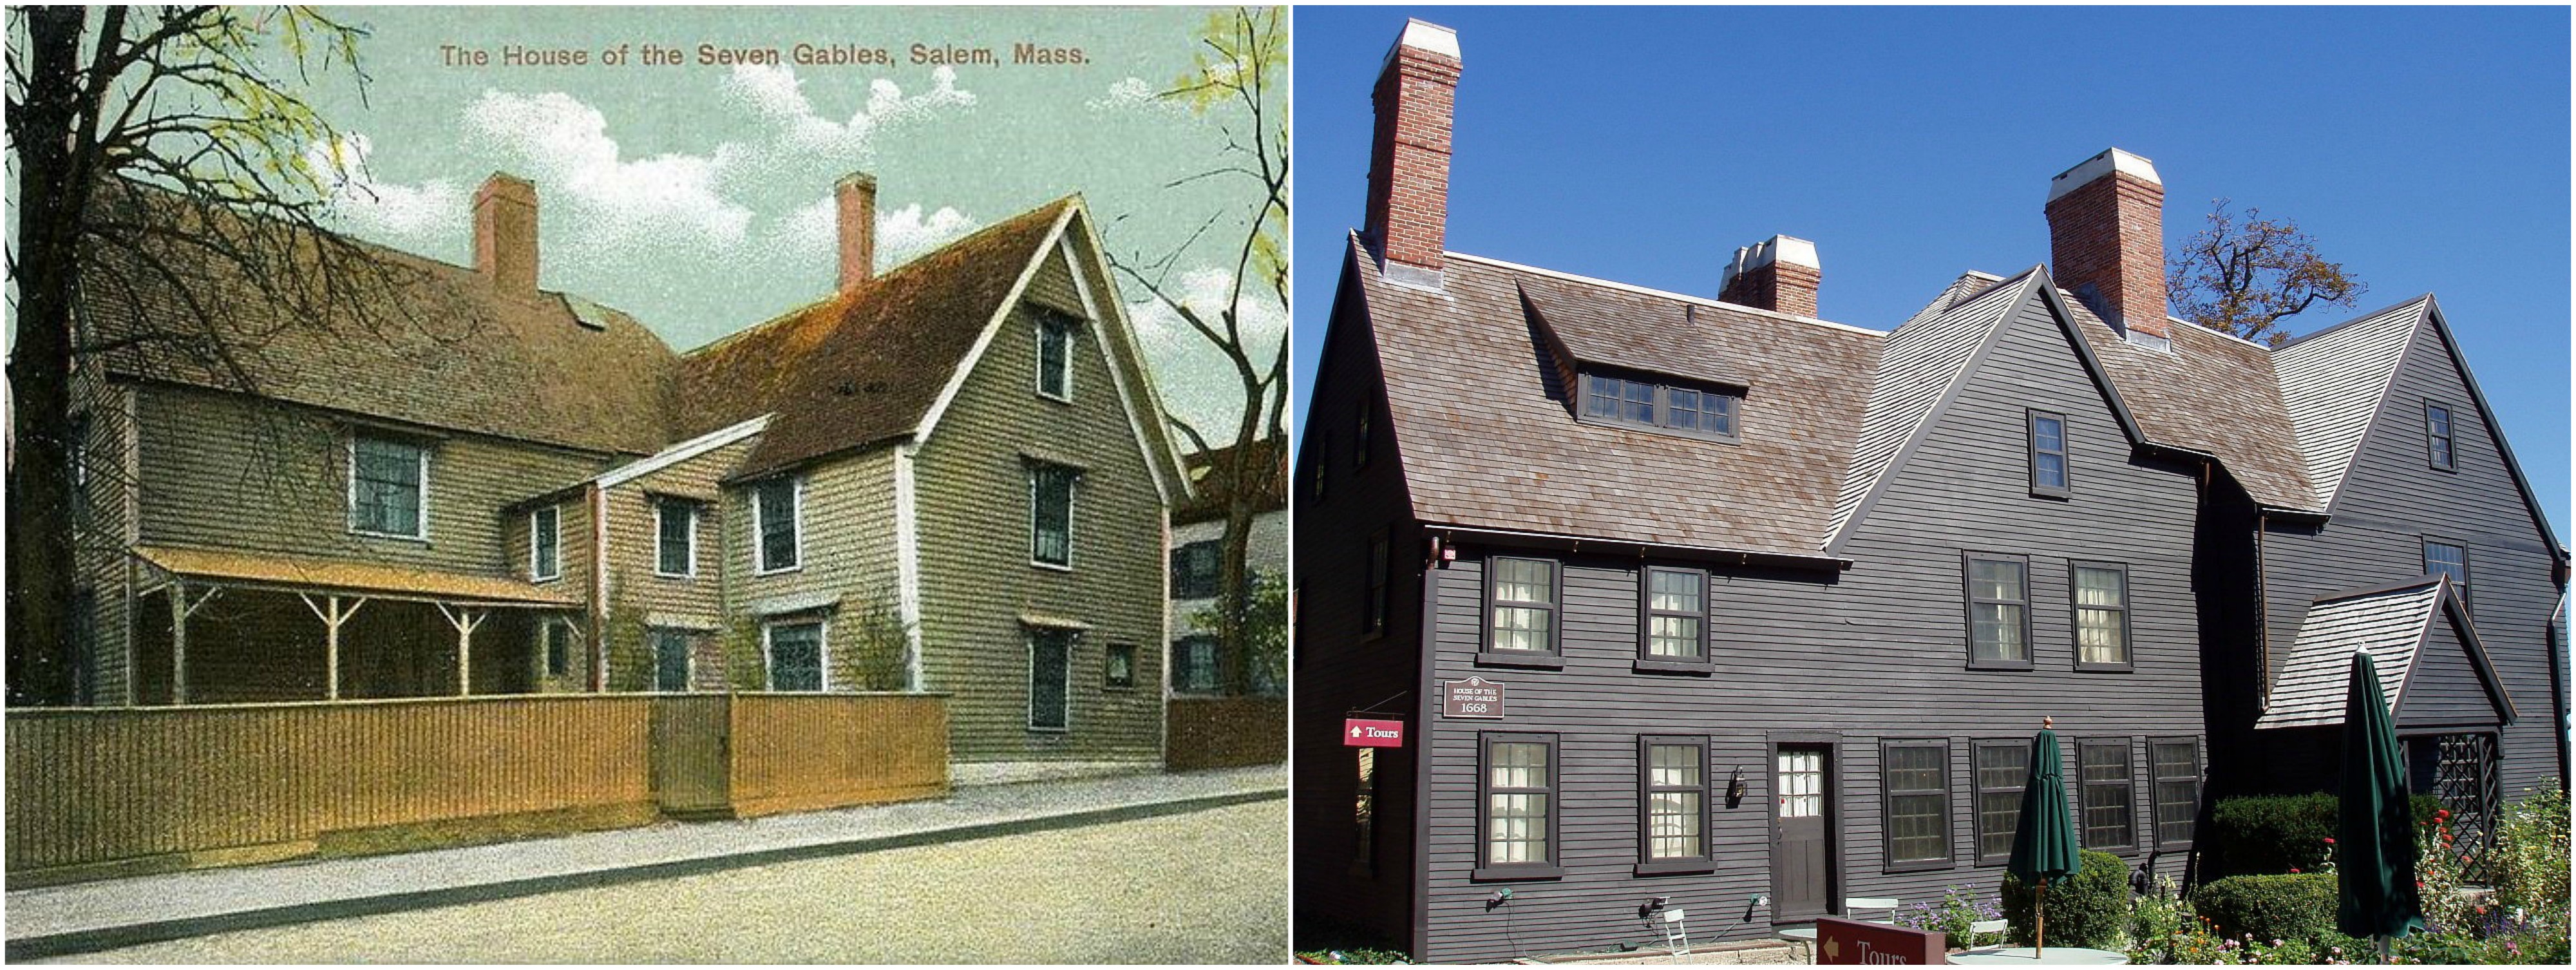 House of the Seven Gables, c. 1905, photo courtesy of WikiCommons, juxtaposed against the restored building today